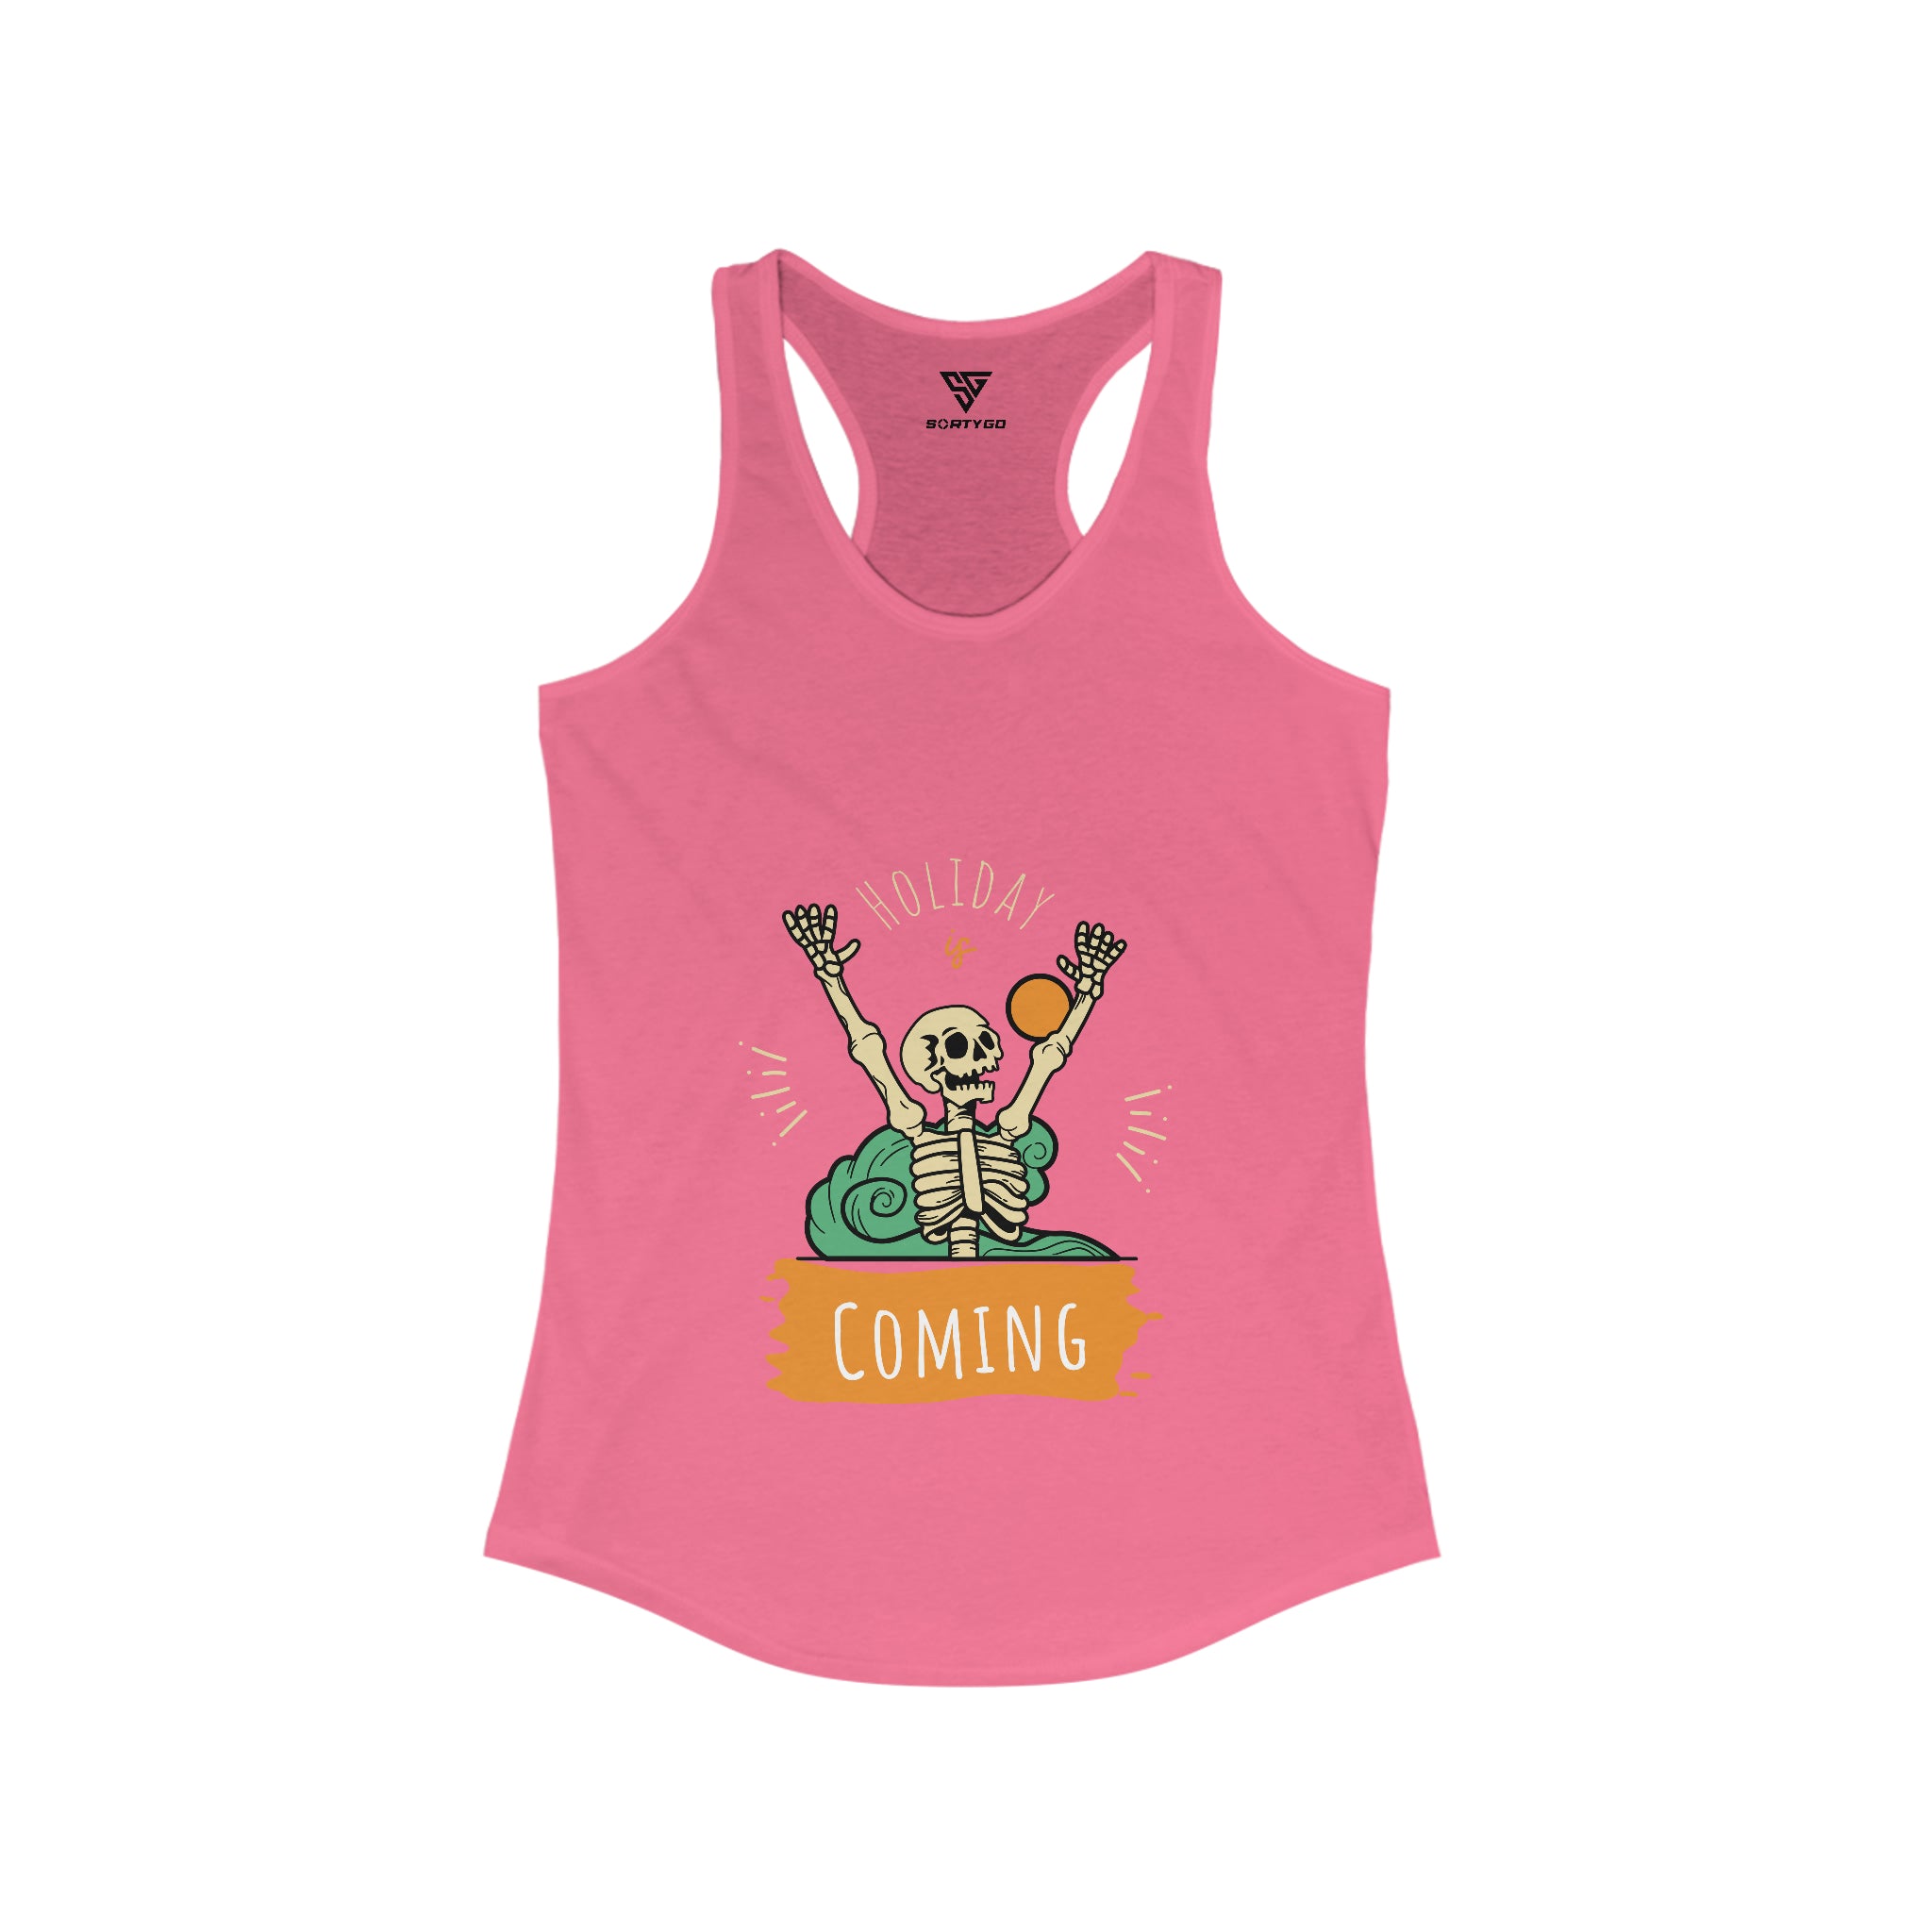 SORTYGO - Holiday is Coming Women Ideal Racerback Tank in Solid Hot Pink